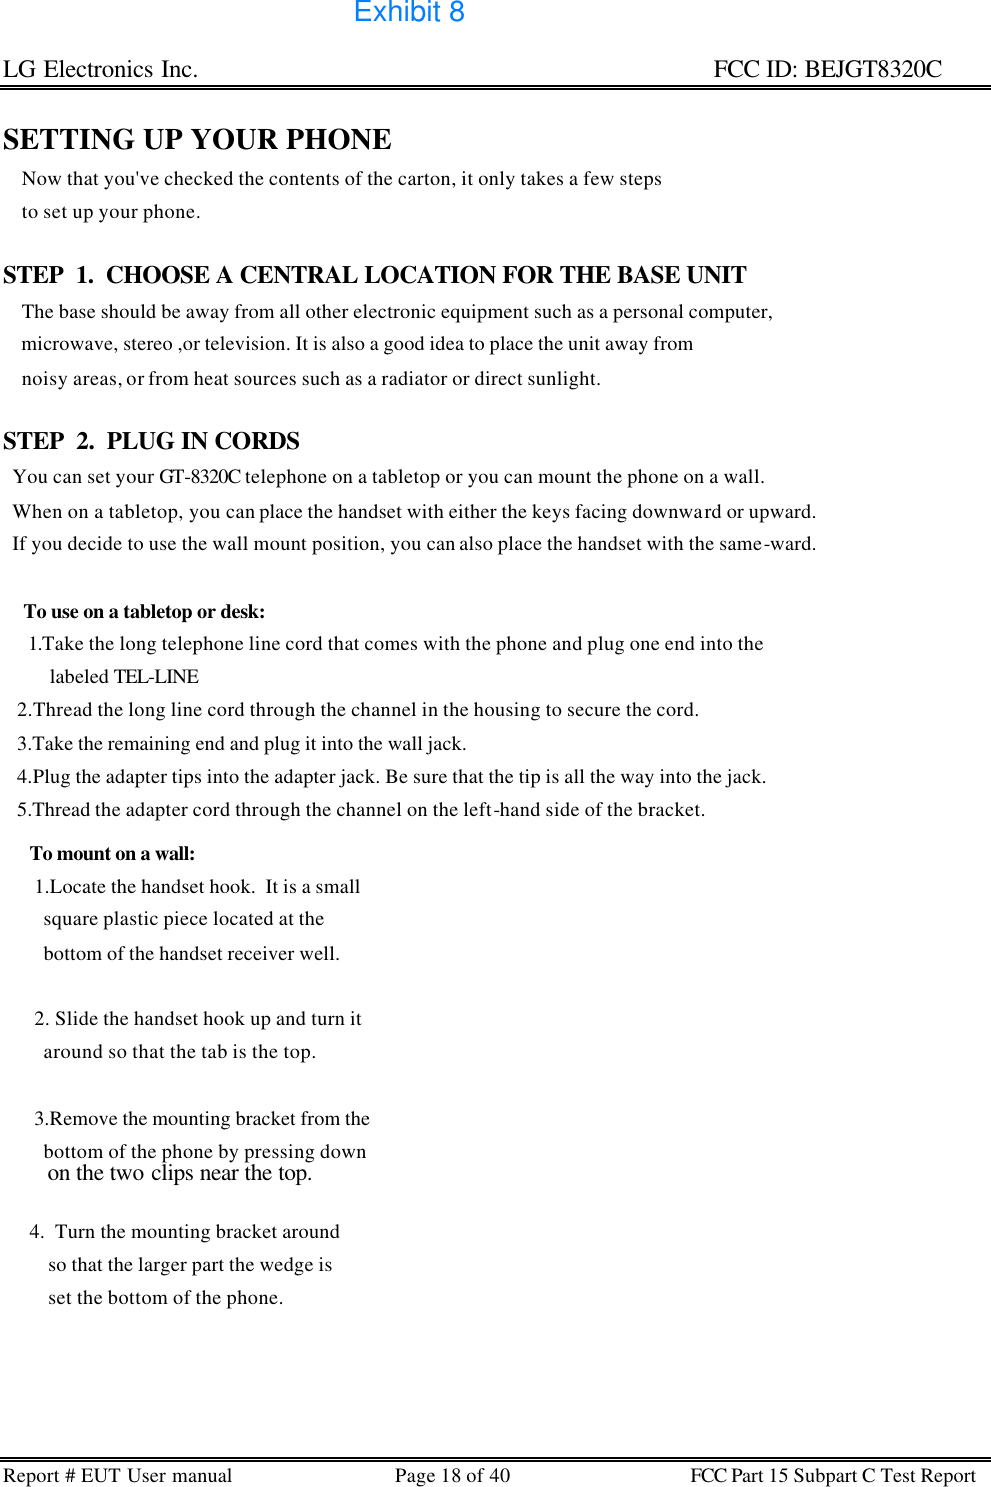 LG Electronics Inc.                                                                                                   FCC ID: BEJGT8320C Report # EUT User manual Page 18 of 40 FCC Part 15 Subpart C Test Report   SETTING UP YOUR PHONE     Now that you&apos;ve checked the contents of the carton, it only takes a few steps     to set up your phone.  STEP  1.  CHOOSE A CENTRAL LOCATION FOR THE BASE UNIT     The base should be away from all other electronic equipment such as a personal computer,     microwave, stereo ,or television. It is also a good idea to place the unit away from      noisy areas, or from heat sources such as a radiator or direct sunlight.  STEP  2.  PLUG IN CORDS   You can set your GT-8320C telephone on a tabletop or you can mount the phone on a wall.    When on a tabletop, you can place the handset with either the keys facing downward or upward.   If you decide to use the wall mount position, you can also place the handset with the same-ward.  To use on a tabletop or desk:  1.Take the long telephone line cord that comes with the phone and plug one end into the     labeled TEL-LINE    2.Thread the long line cord through the channel in the housing to secure the cord.    3.Take the remaining end and plug it into the wall jack.    4.Plug the adapter tips into the adapter jack. Be sure that the tip is all the way into the jack.    5.Thread the adapter cord through the channel on the left-hand side of the bracket.    To mount on a wall:  1.Locate the handset hook.  It is a small    square plastic piece located at the    bottom of the handset receiver well.   2. Slide the handset hook up and turn it     around so that the tab is the top.   3.Remove the mounting bracket from the    bottom of the phone by pressing down    on the two clips near the top.  4.  Turn the mounting bracket around      so that the larger part the wedge is      set the bottom of the phone.   Exhibit 8